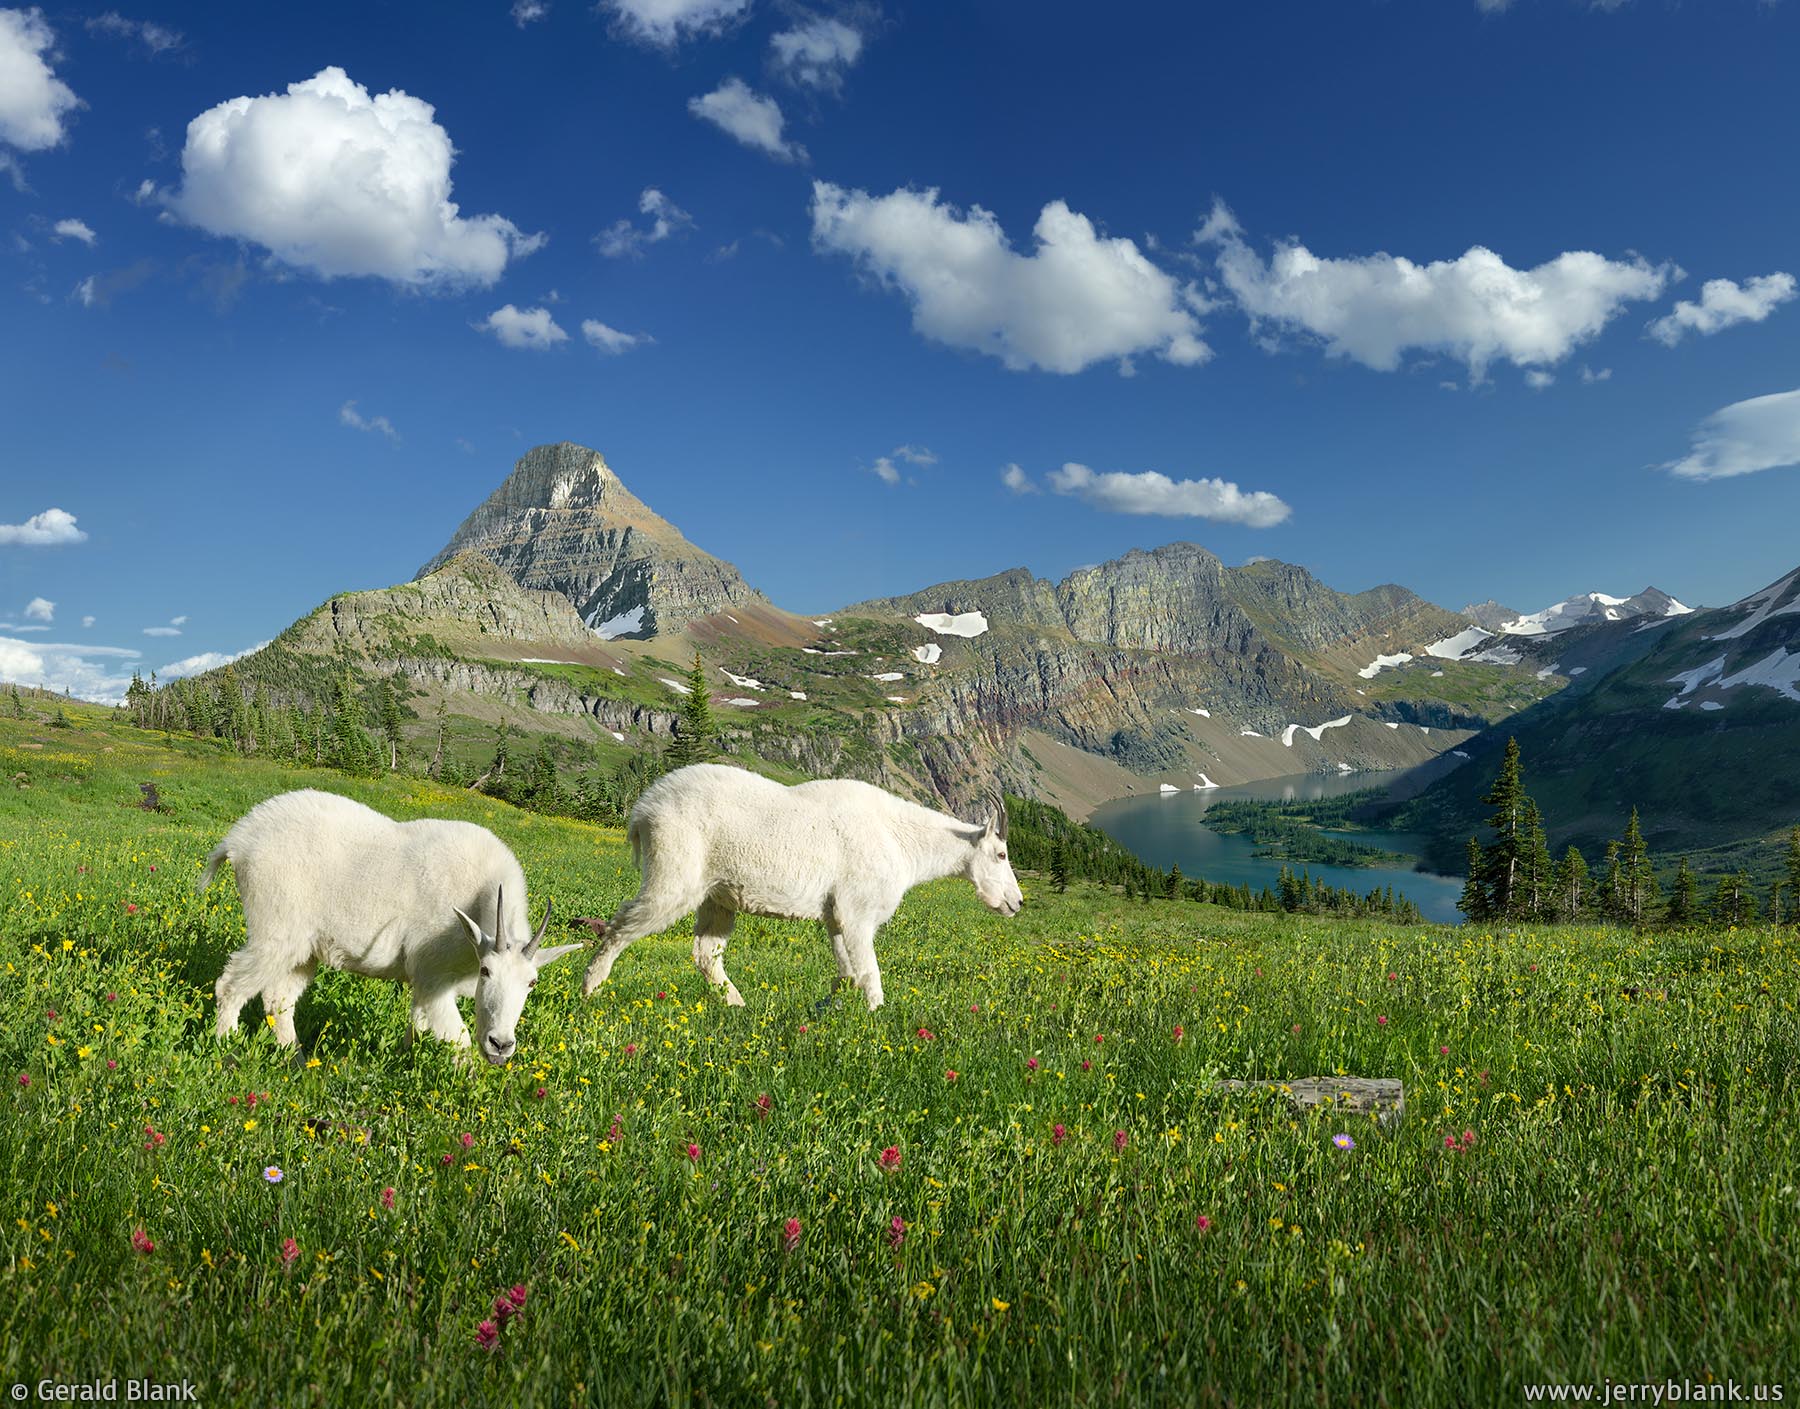 #26111 - Mountain goats grazing in an alpine meadow above Hidden Lake in Glacier National Park, Montana, with Reynolds Mountain and the Dragon’s Tail in the background - photo by Jerry Blank